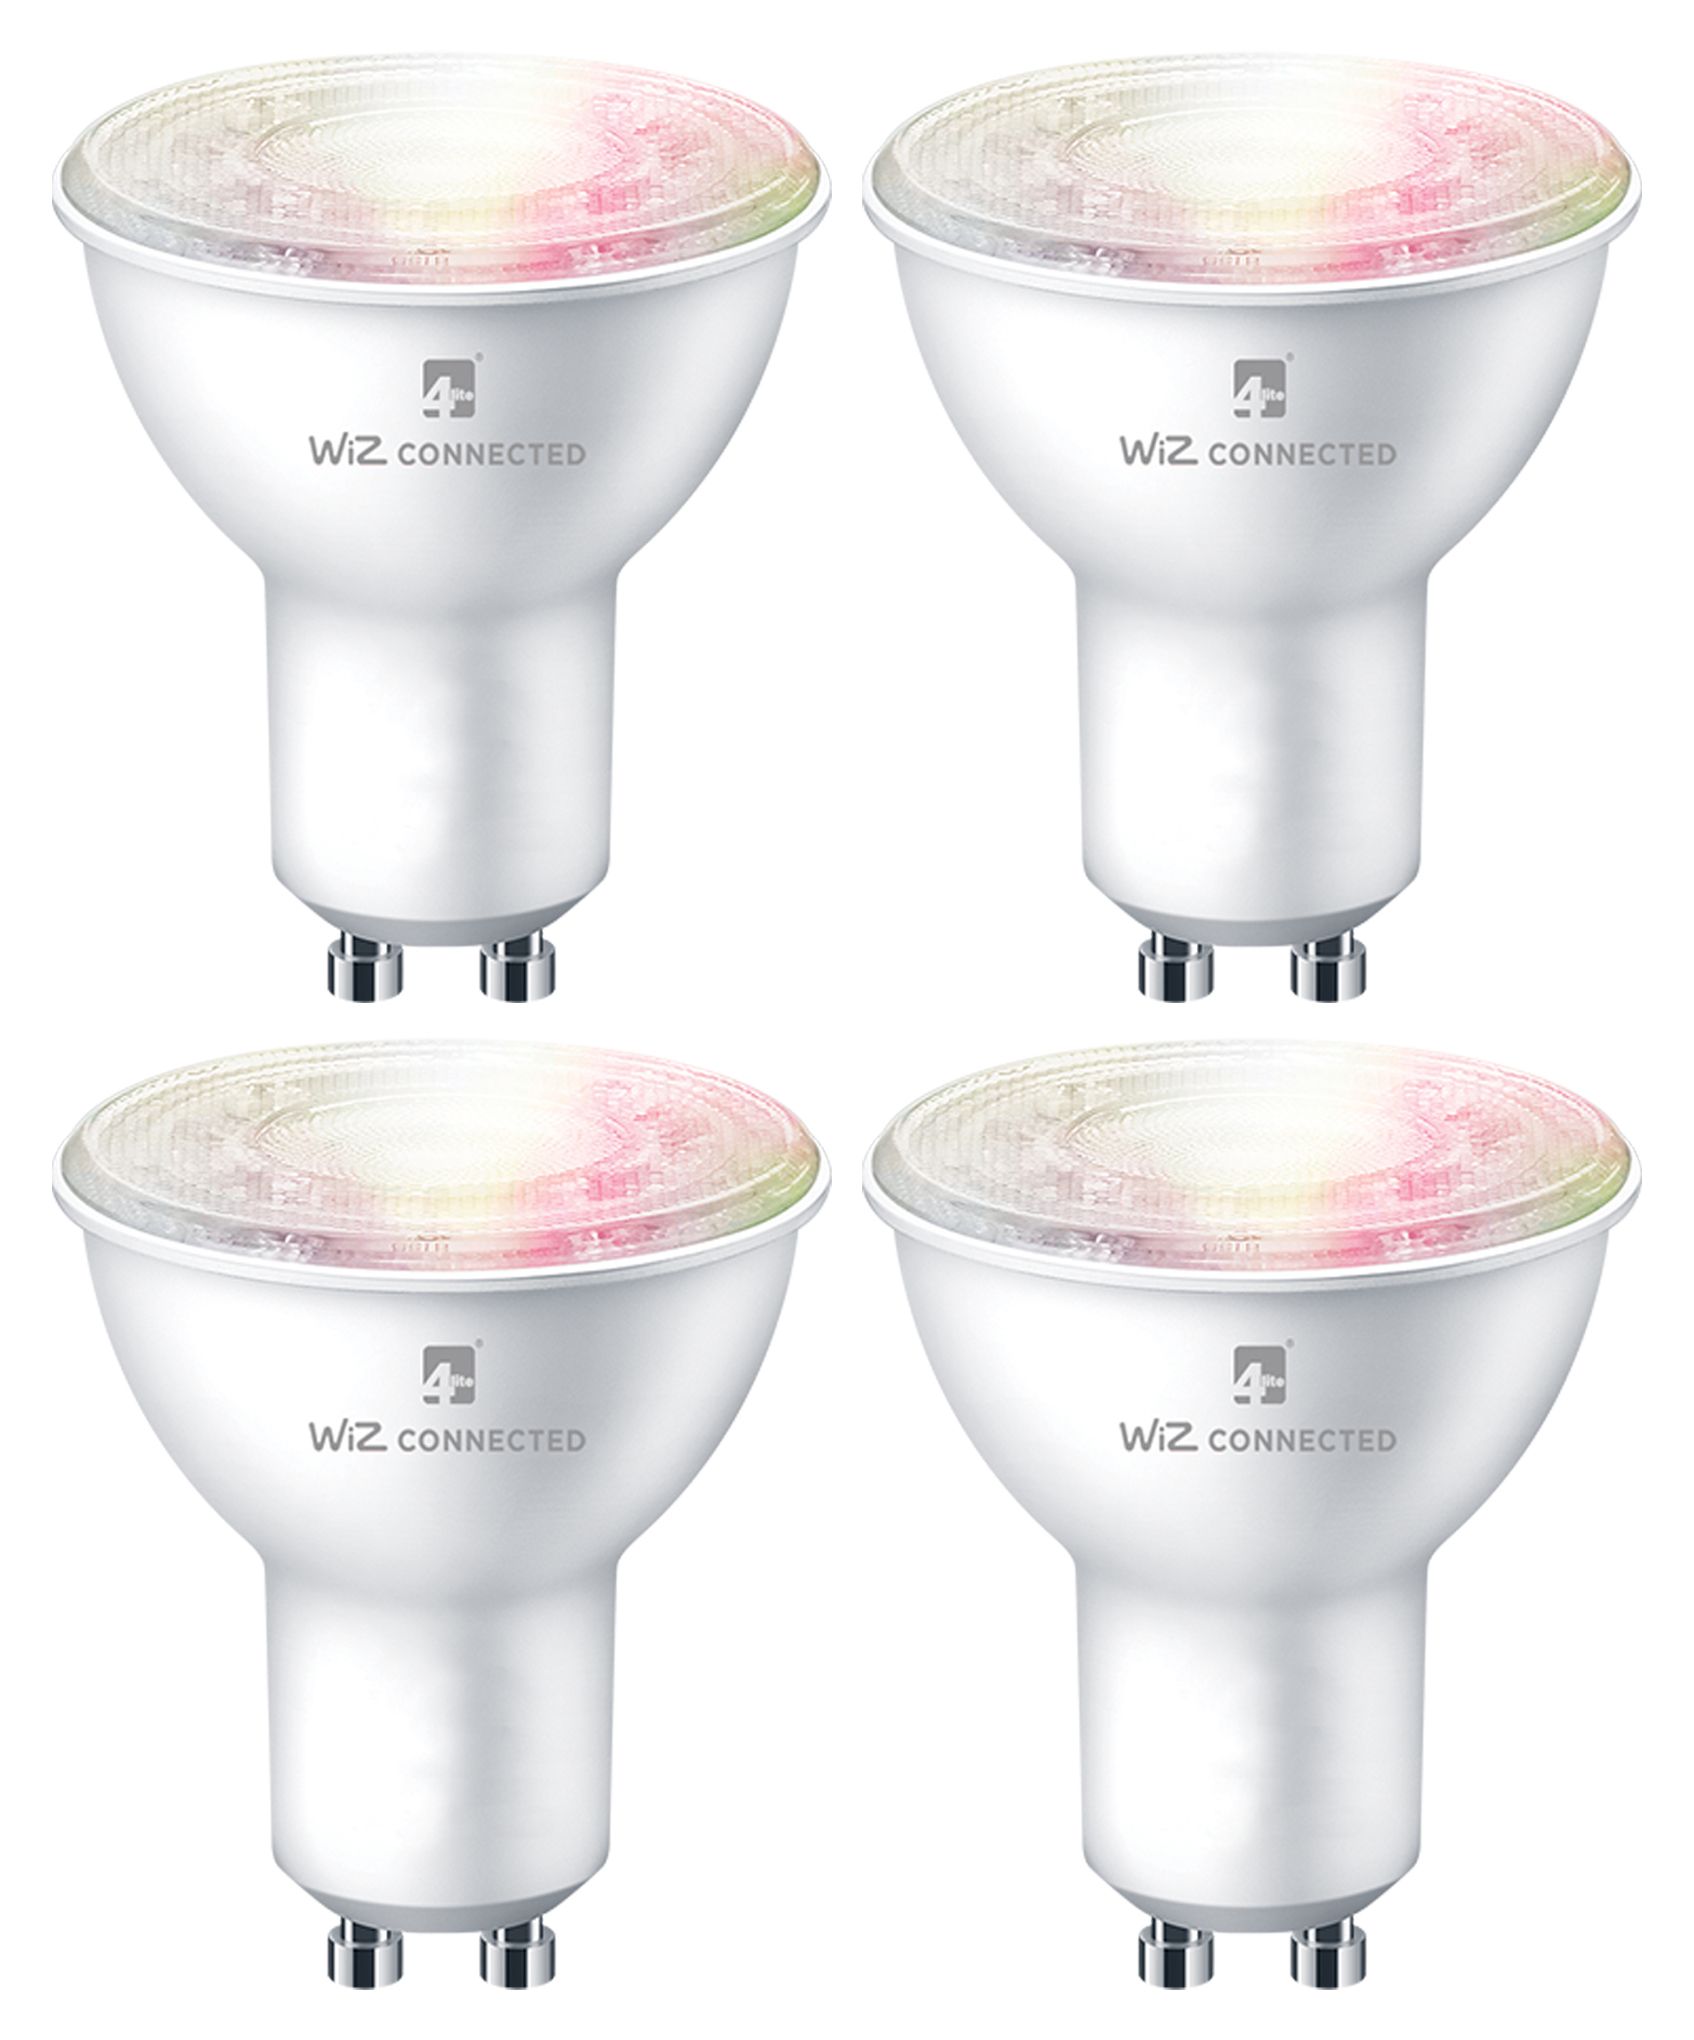 Image of 4lite WiZ Connected LED SMART GU10 Light Bulbs - White & Colour - Pack of 4